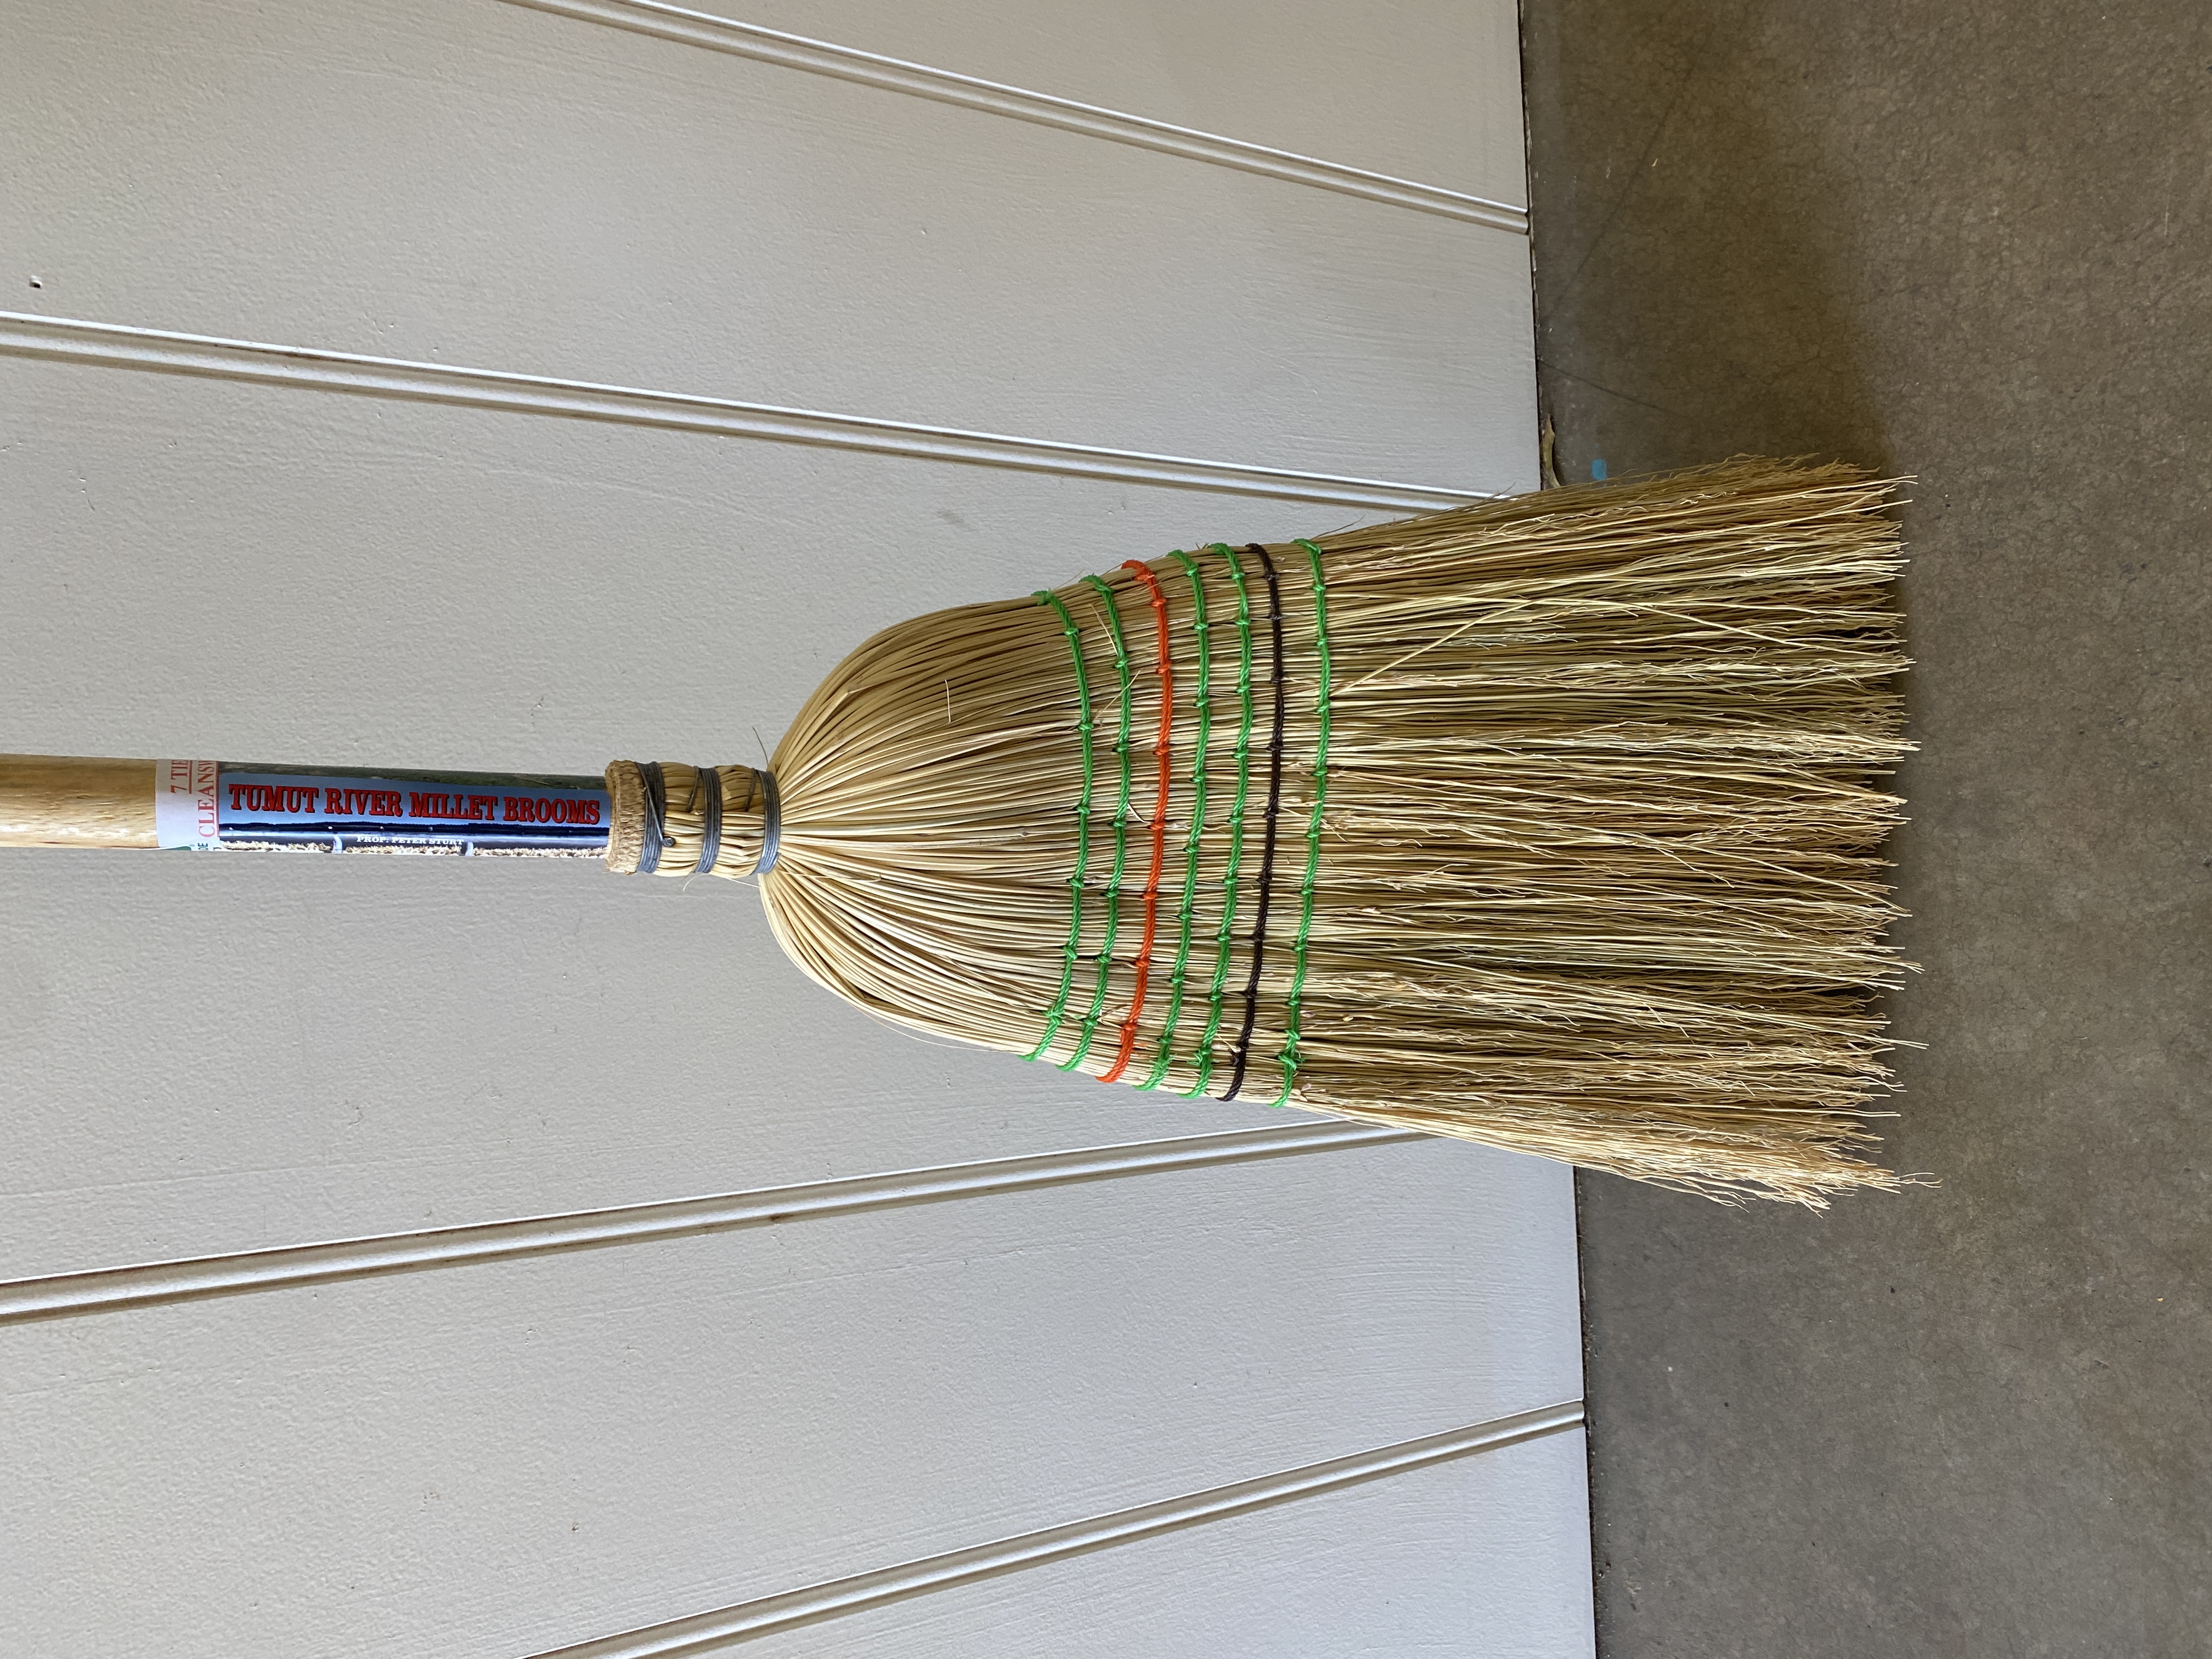 BROOMS, MOPS,CARPET SWEEPERS &amp CLEANERS (5)